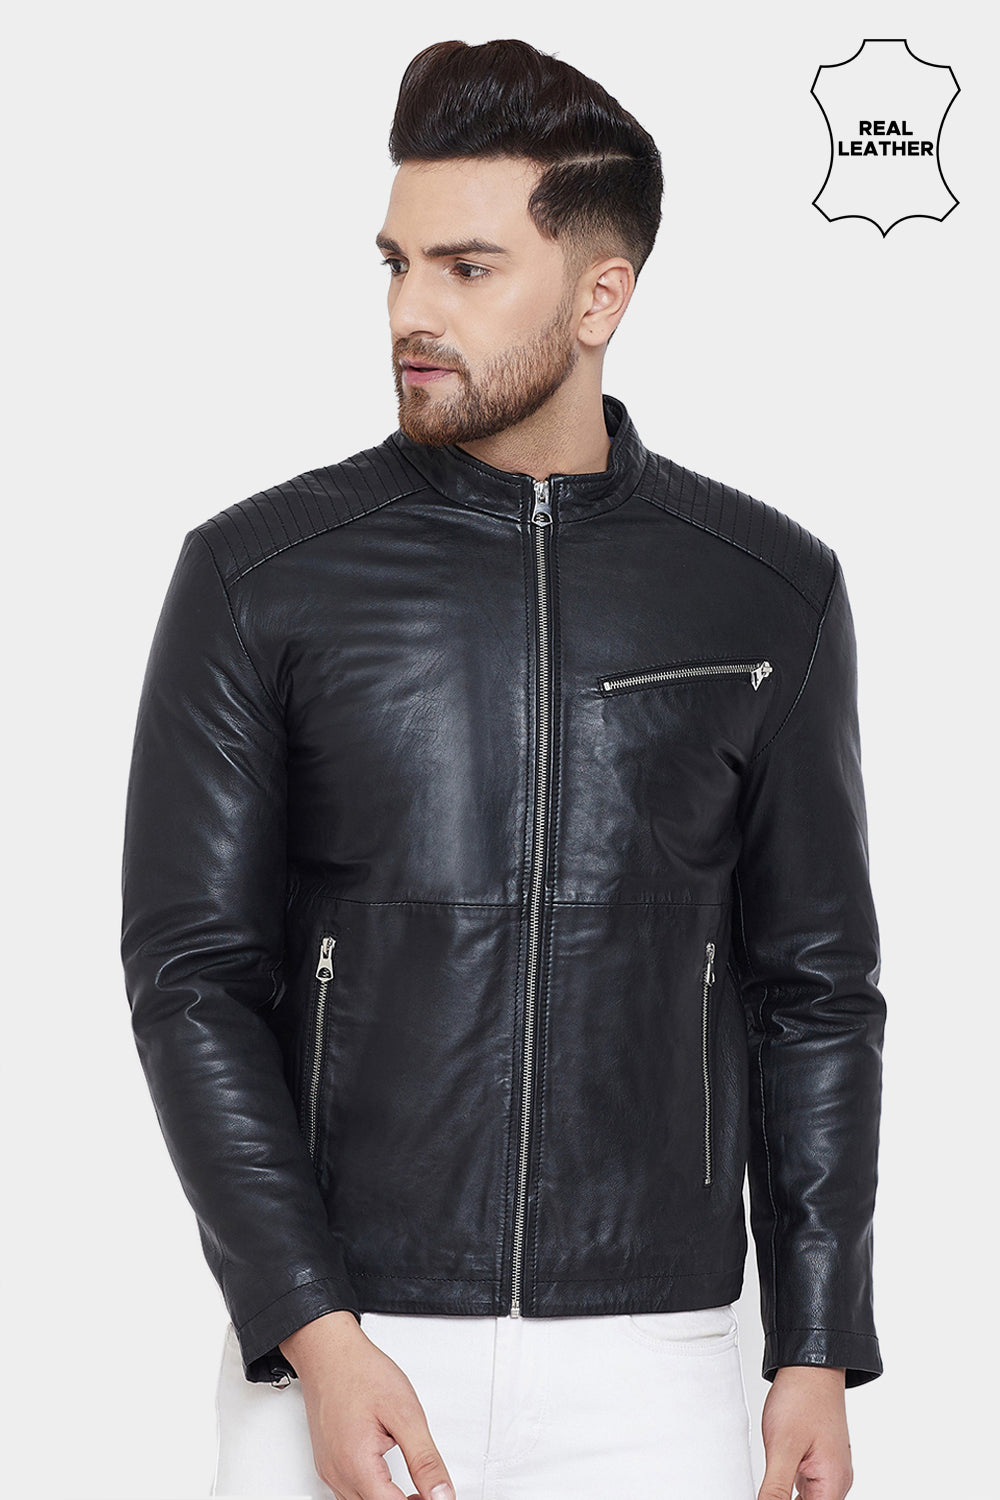 Justanned Up Collar Real Leather Black Jacket